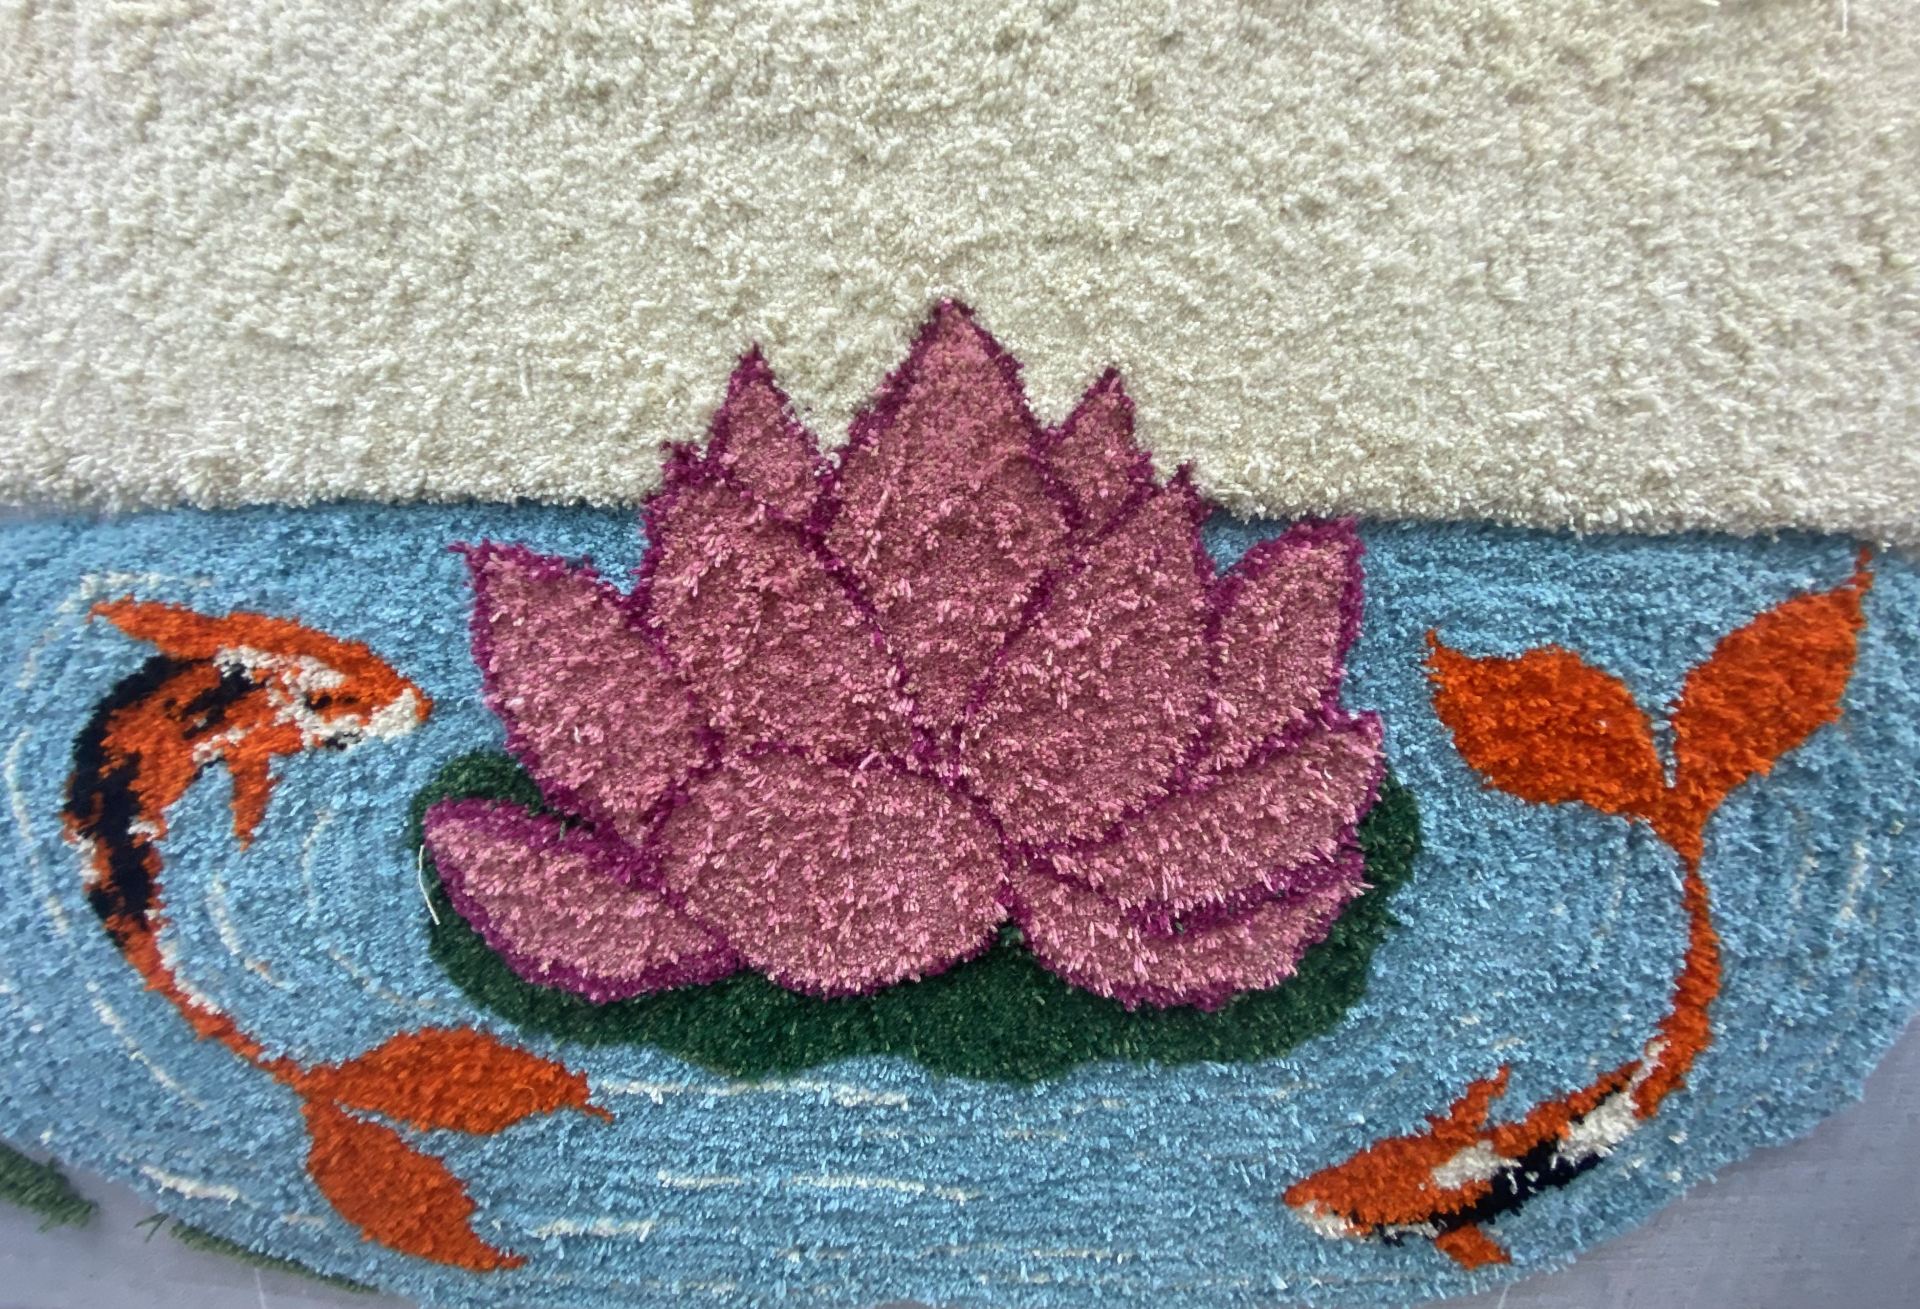 A tufted image of a tufted flower on a body of water, being circled by two orange fish.